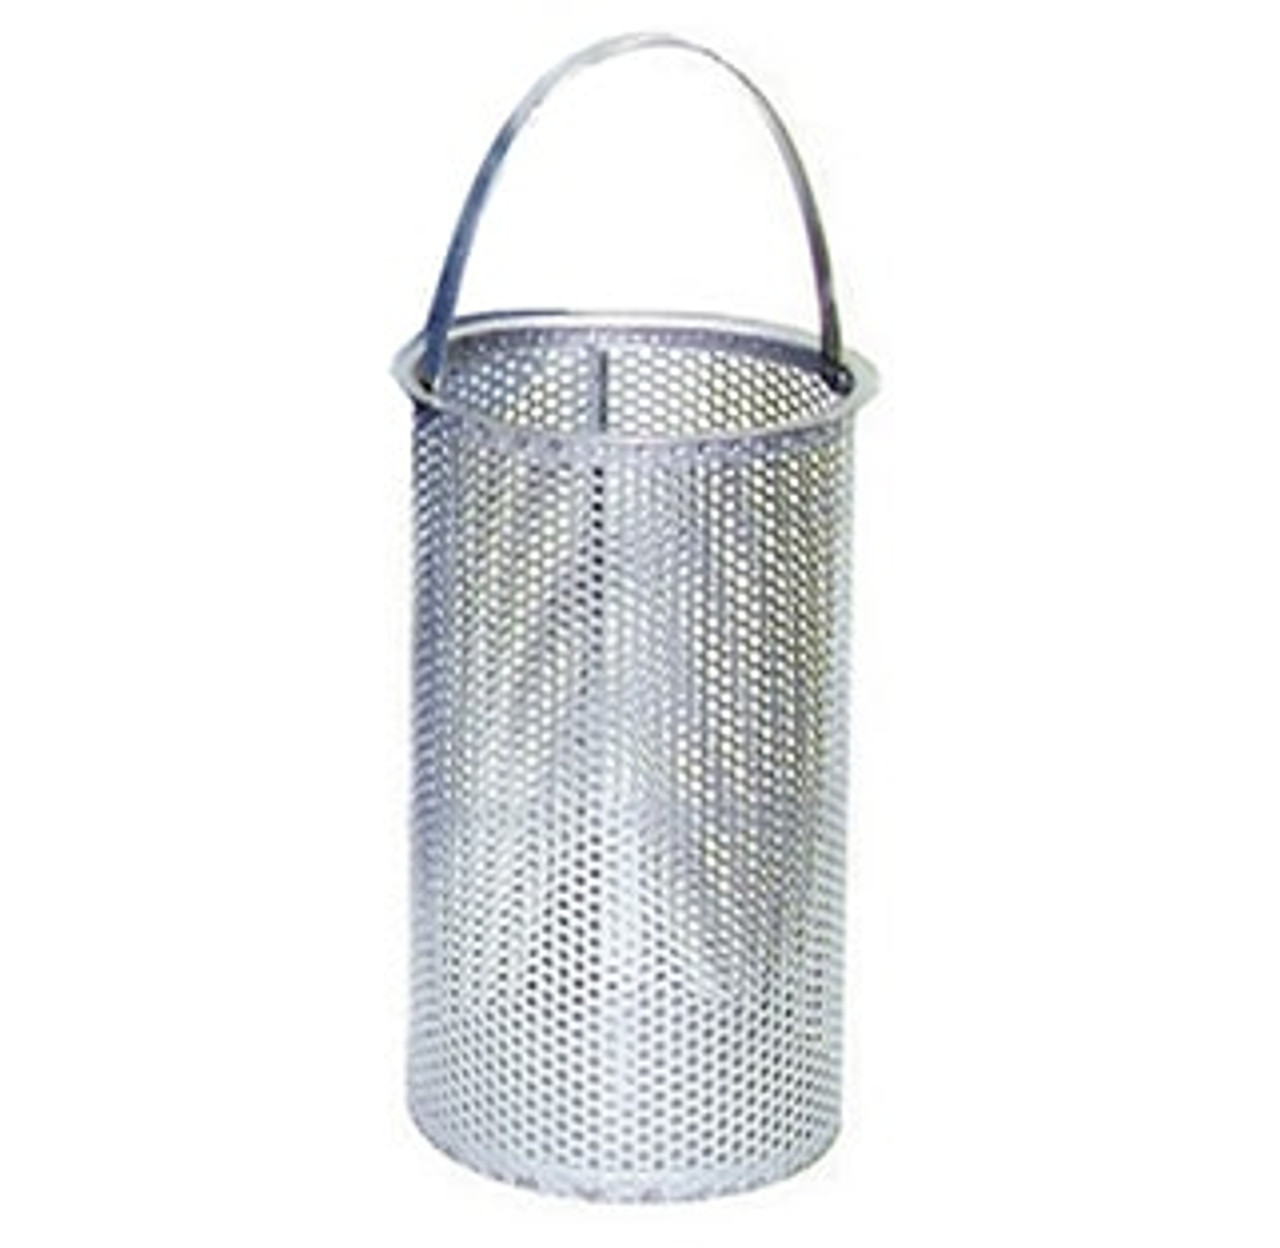 1/4" Perforated Replacement Basket for 1-1/2" Eaton Model 30R Strainer